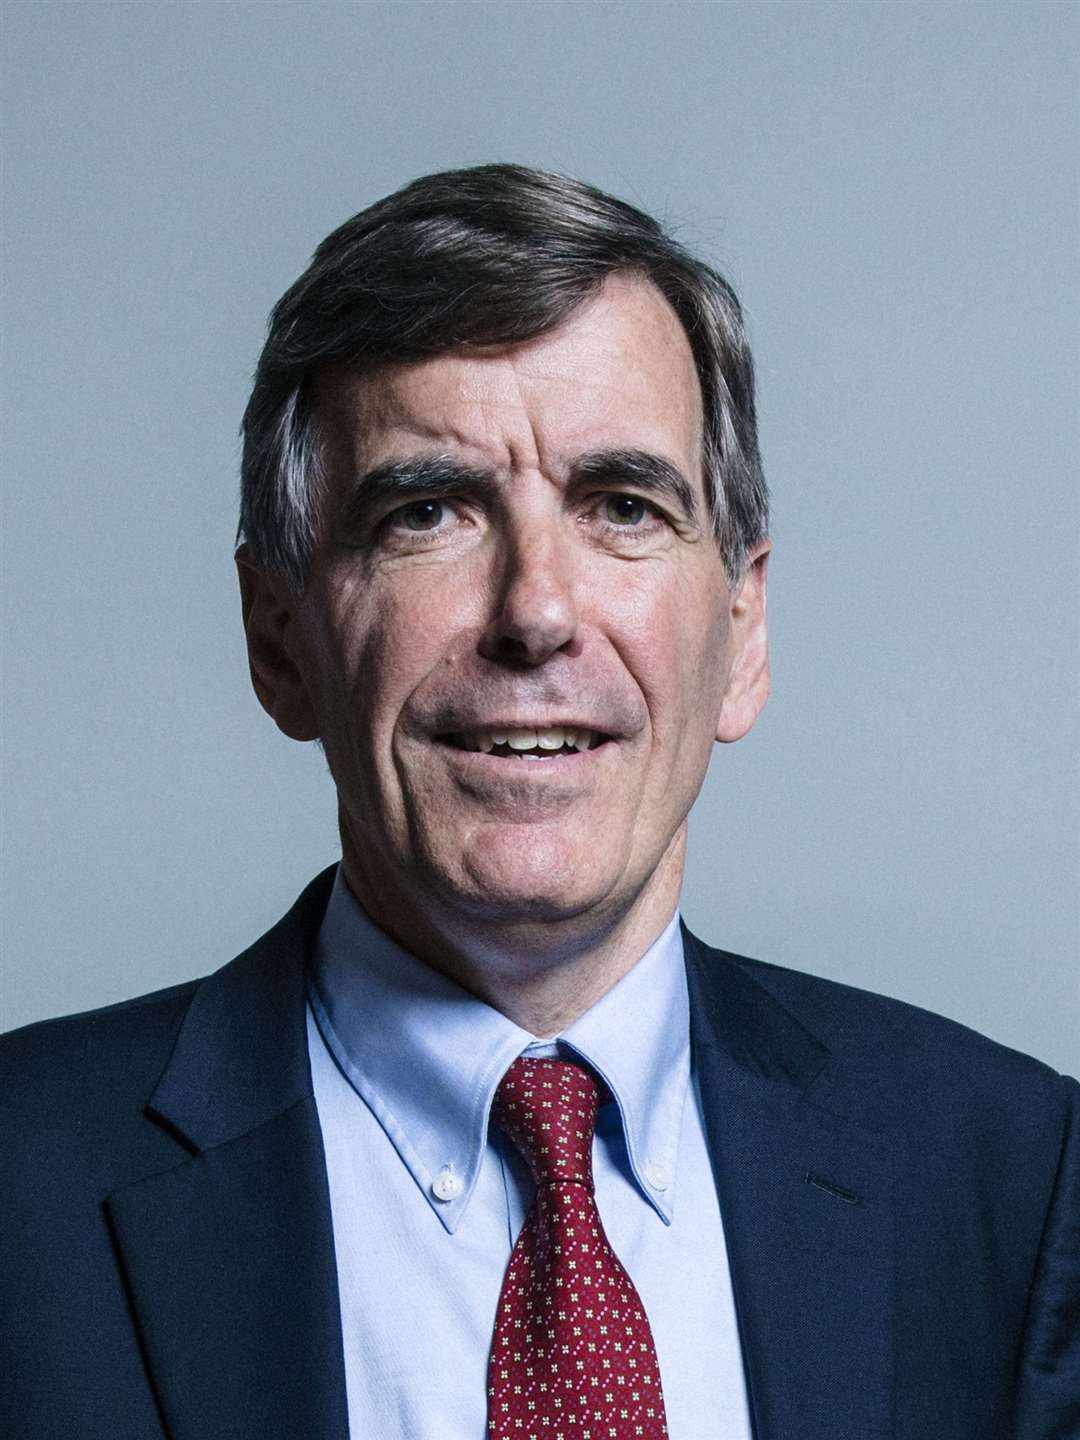 Minister for Welfare Delivery David Rutley.